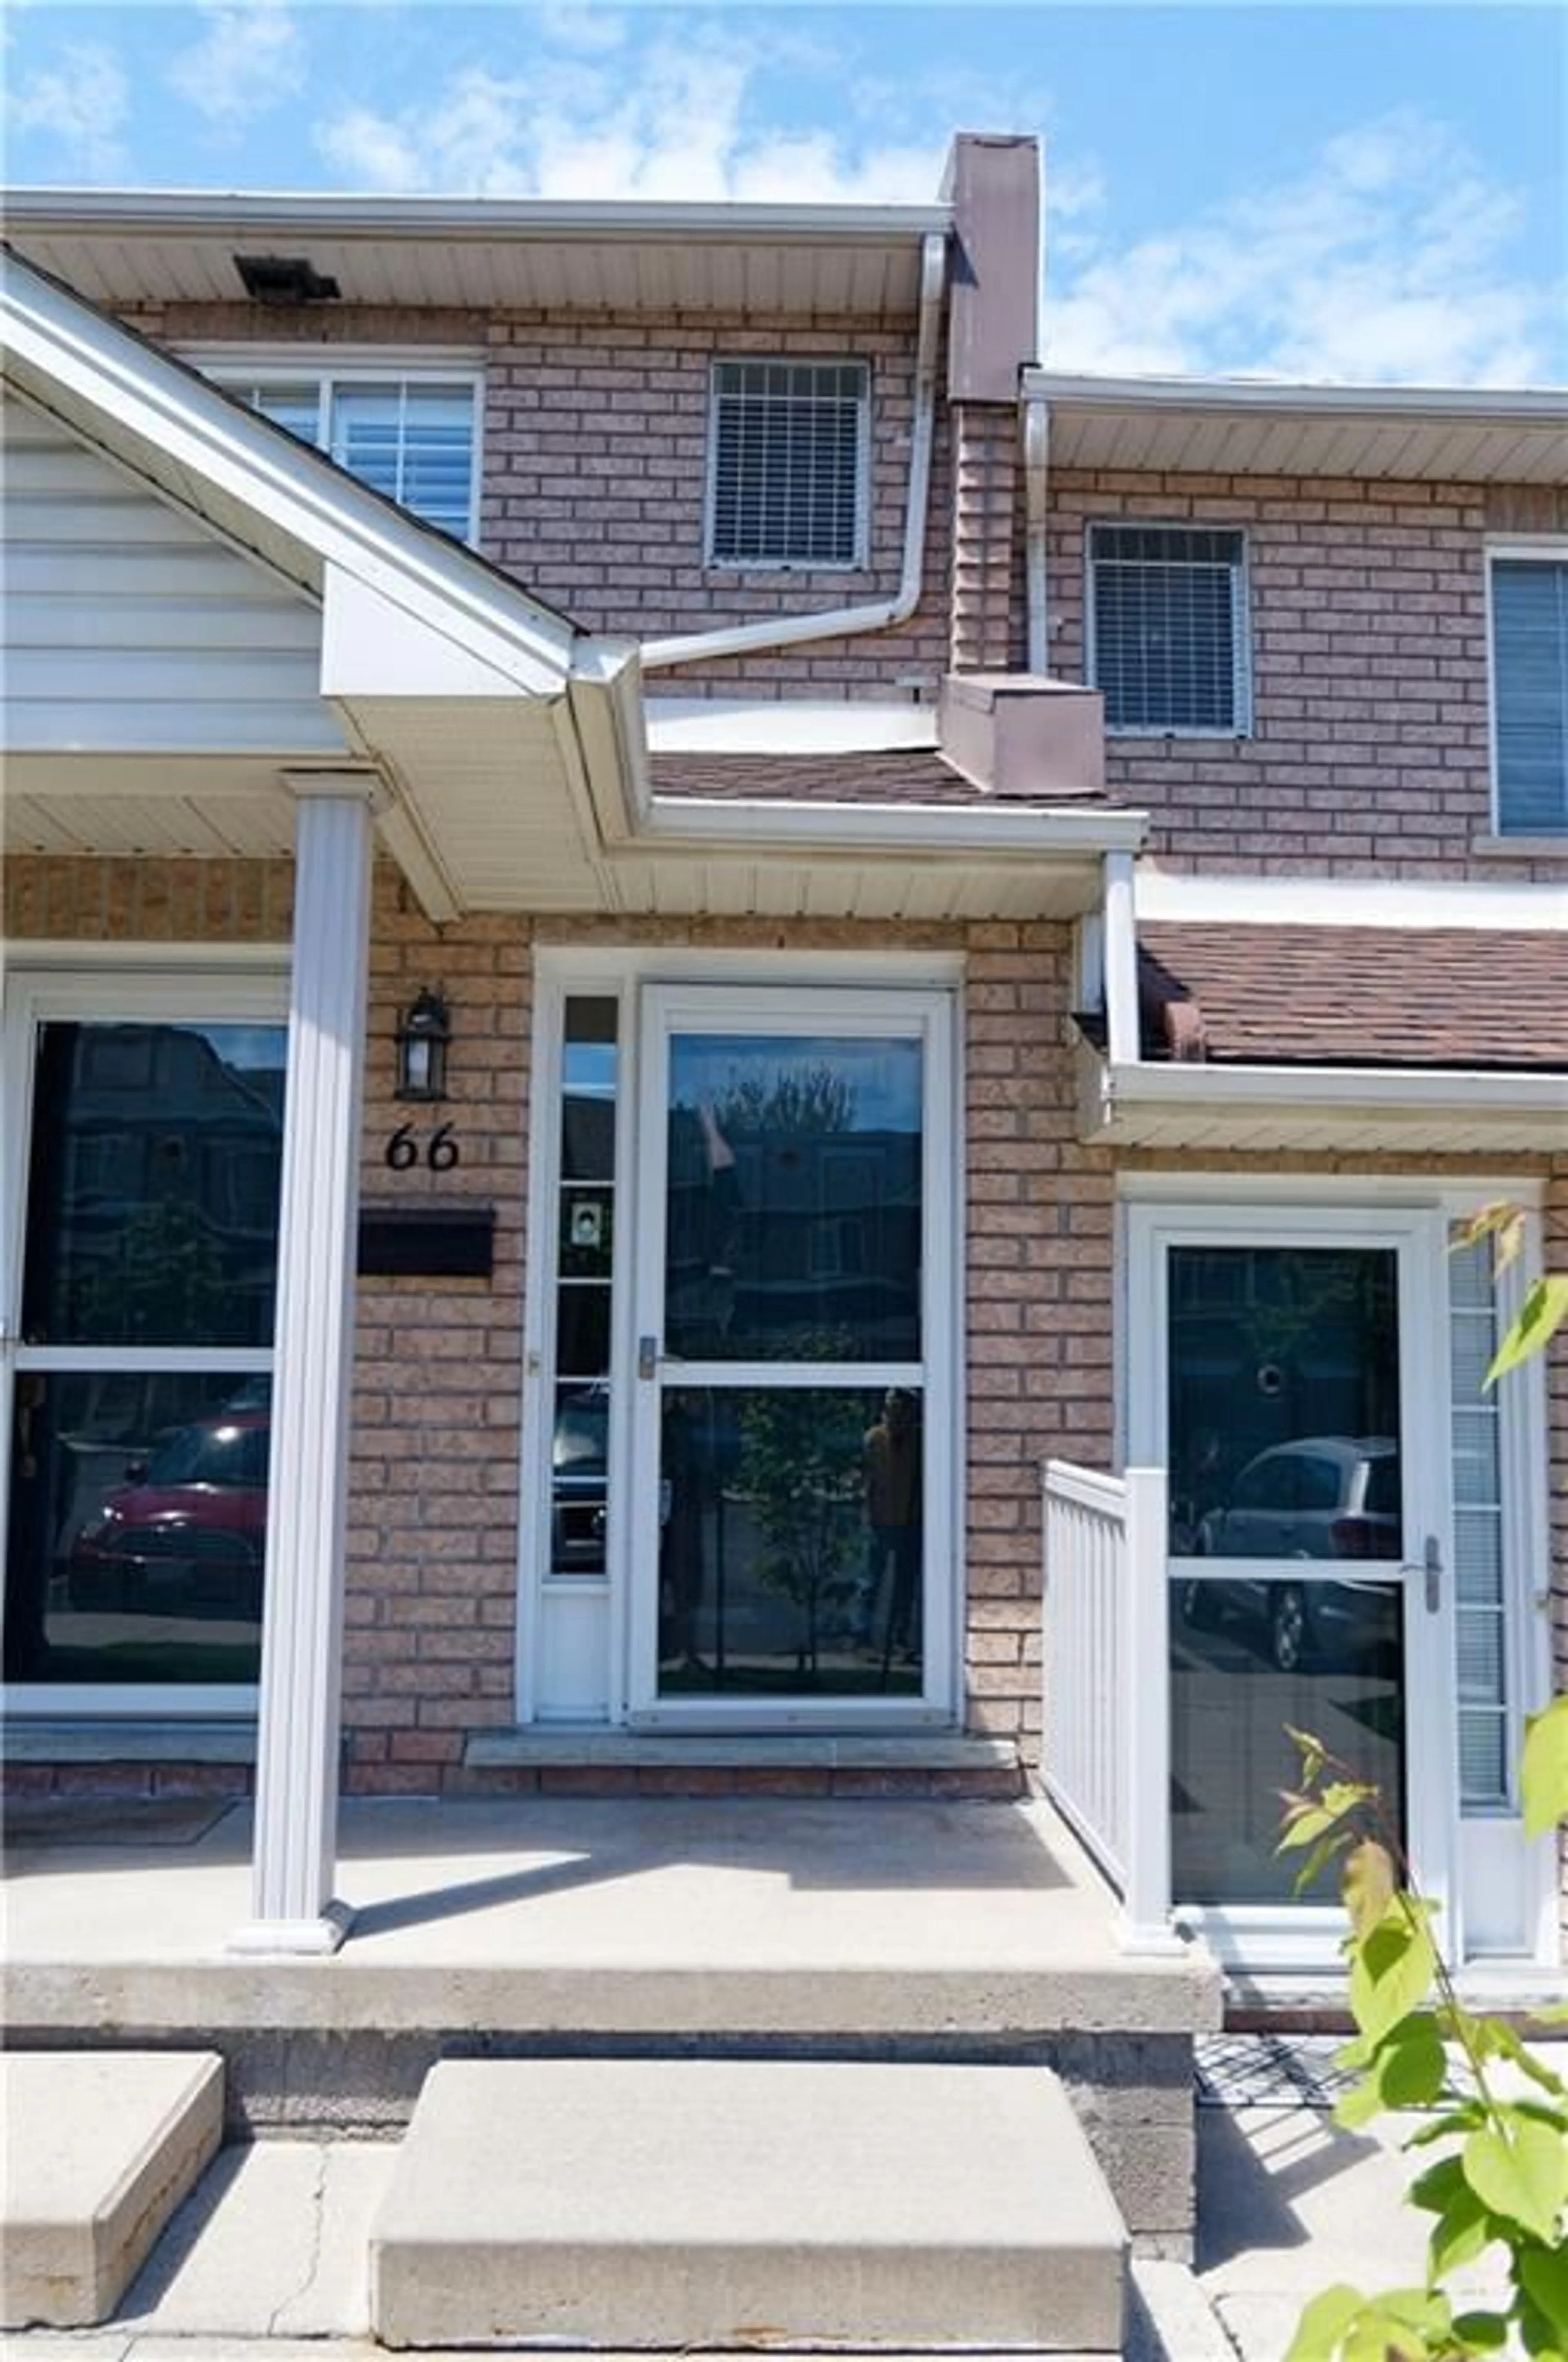 Home with brick exterior material for 2737 KING St #66, Hamilton Ontario L8G 5H1